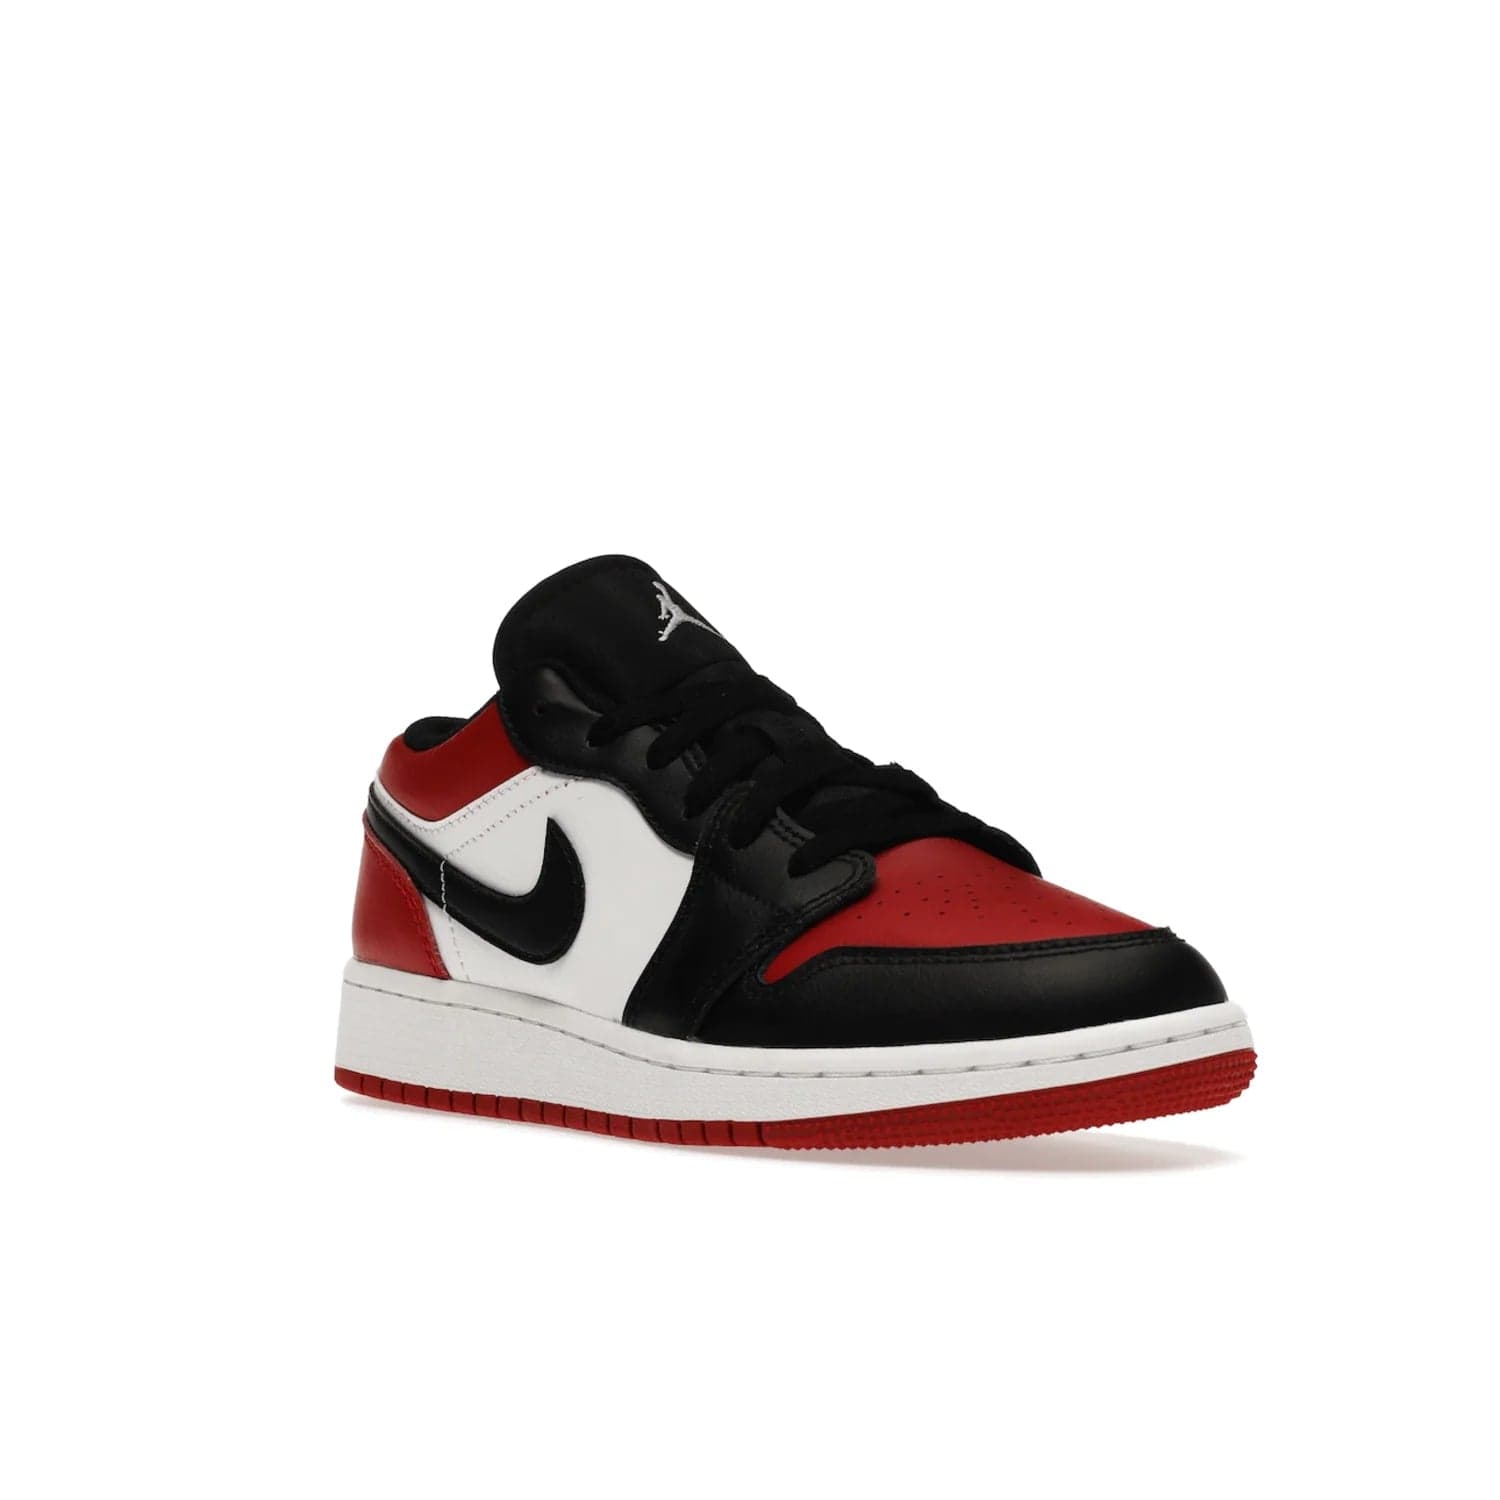 Jordan 1 Low Bred Toe (GS) - Image 6 - Only at www.BallersClubKickz.com - #
Iconic sneaker from Jordan brand with classic colorway, unique detailing & Air Jordan Wings logo. Step into the shoes of the greats with the Jordan 1 Low Bred Toe GS!